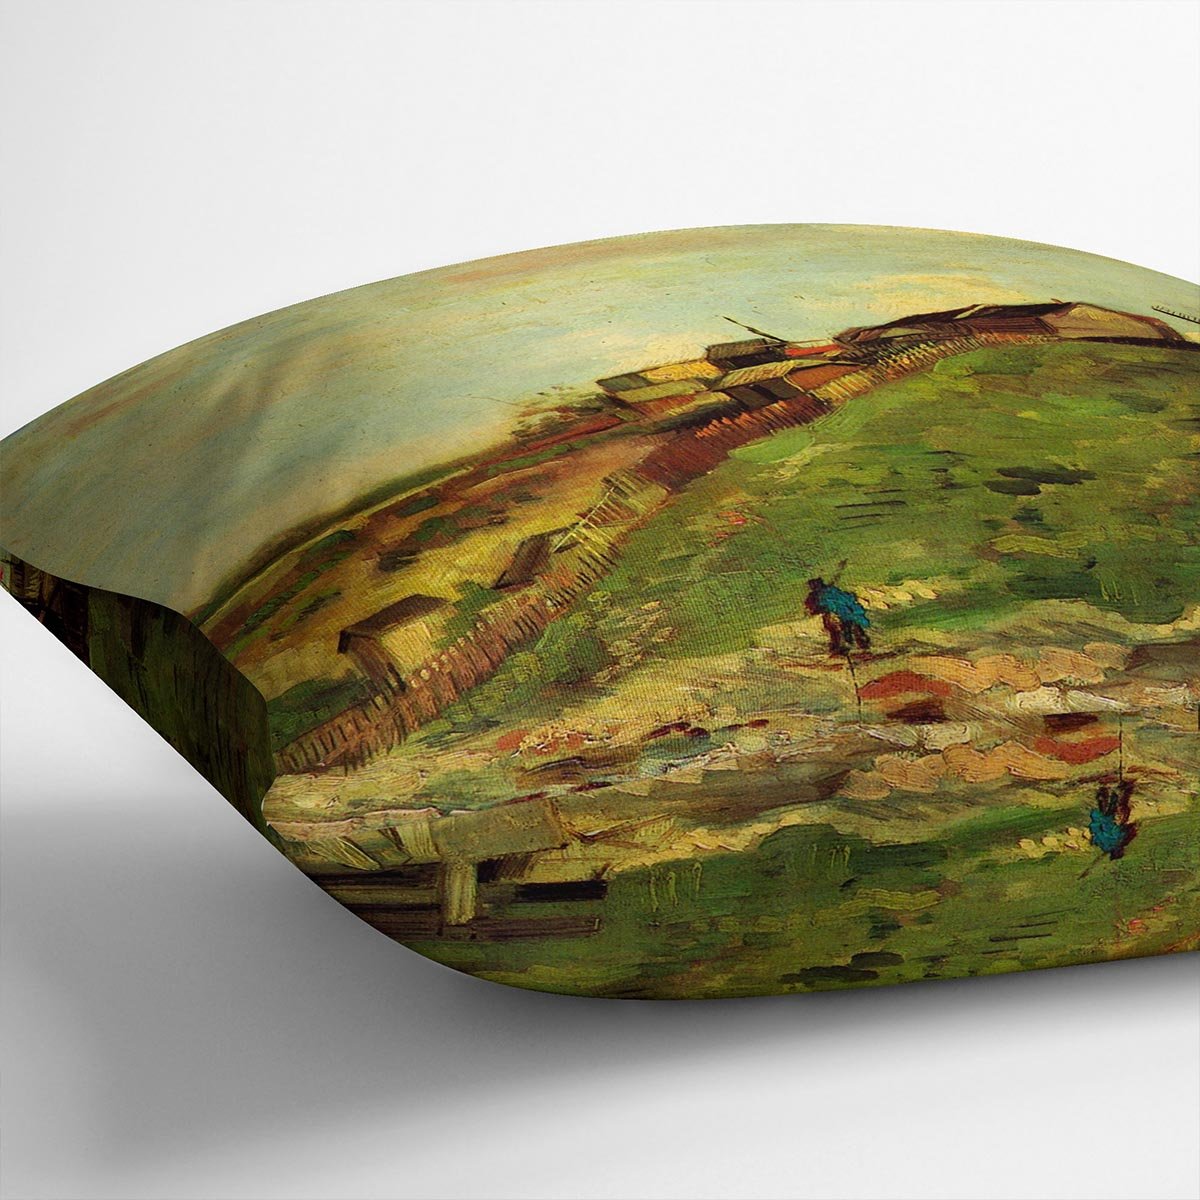 Montmartre Quarry the Mills by Van Gogh Throw Pillow